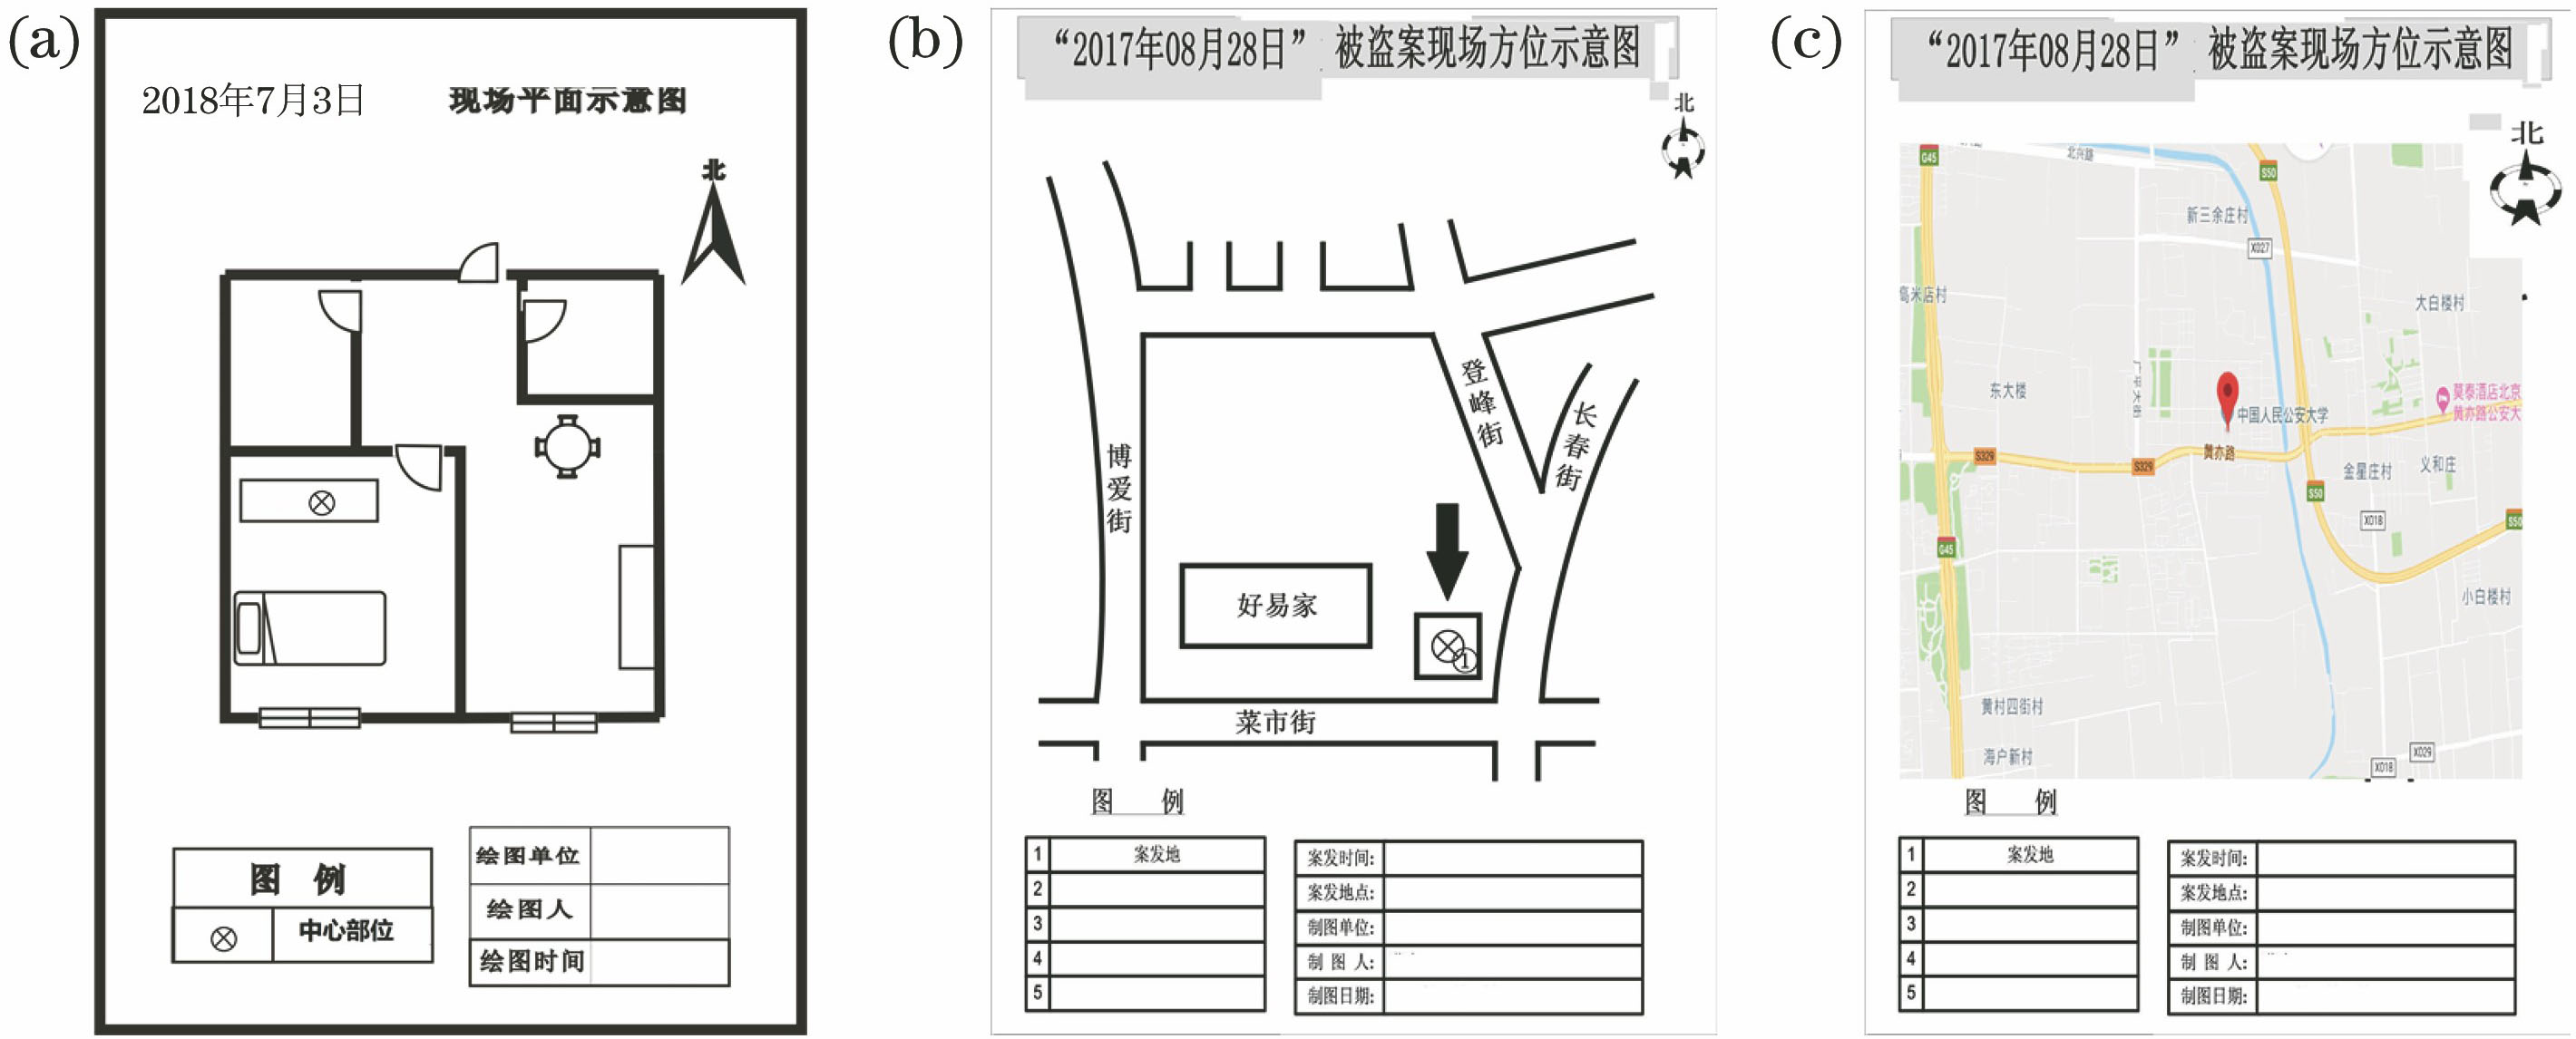 Specification of crime scene sketches. (a) Crime scene overview sketch; (b) self-drawn location sketch; (c) map-screenshot location sketch